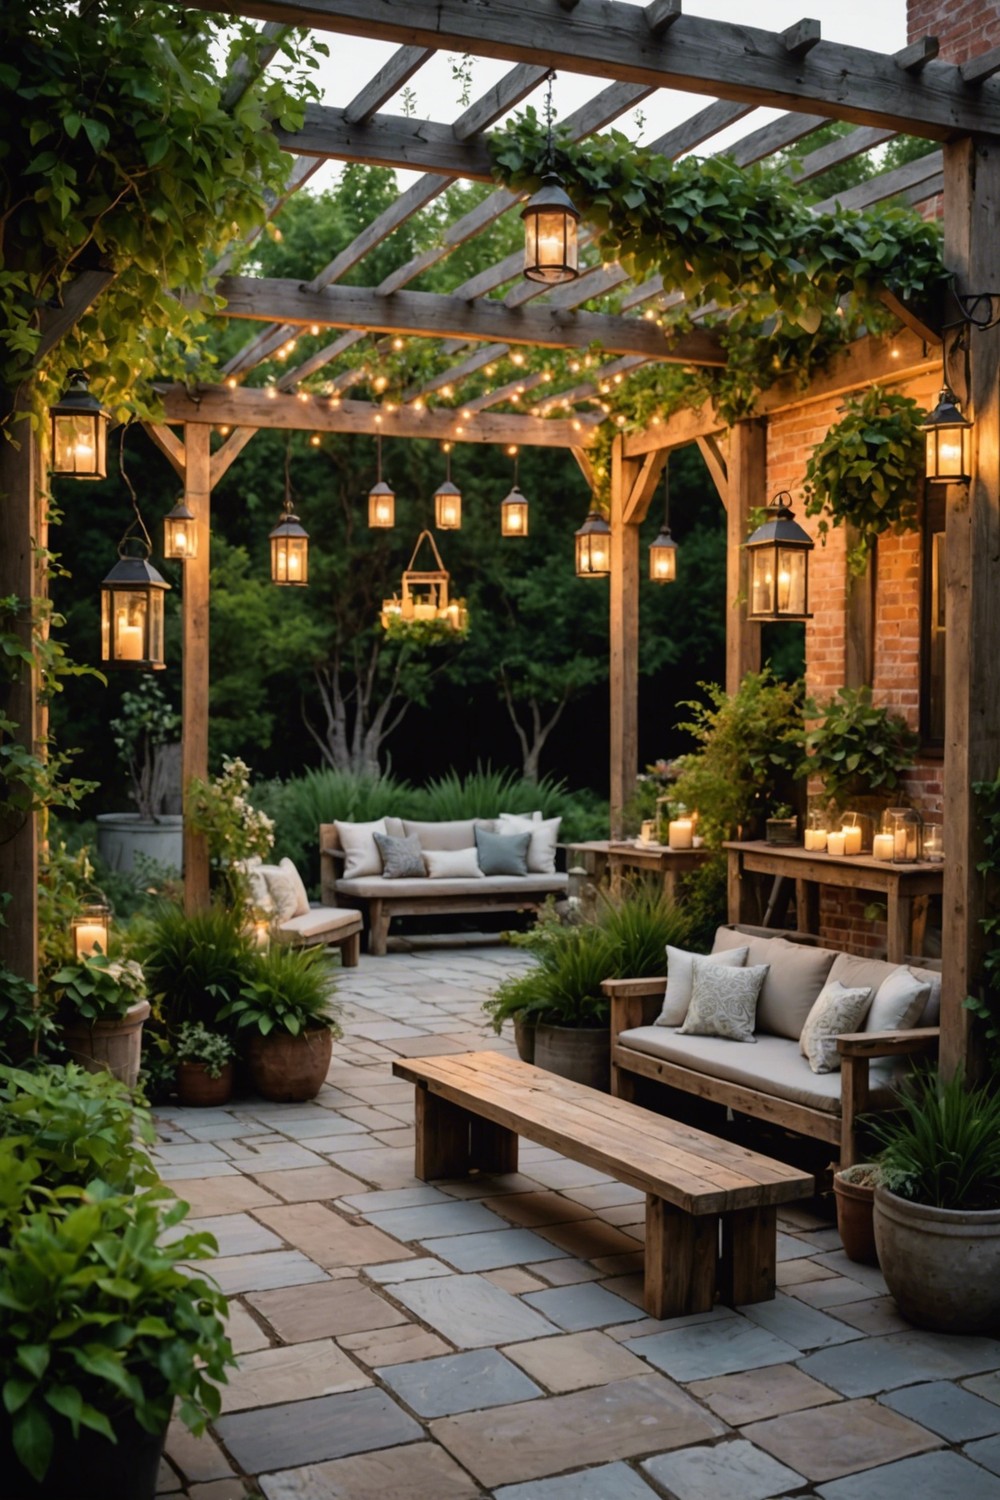 Rustic Patio with Wooden Accents